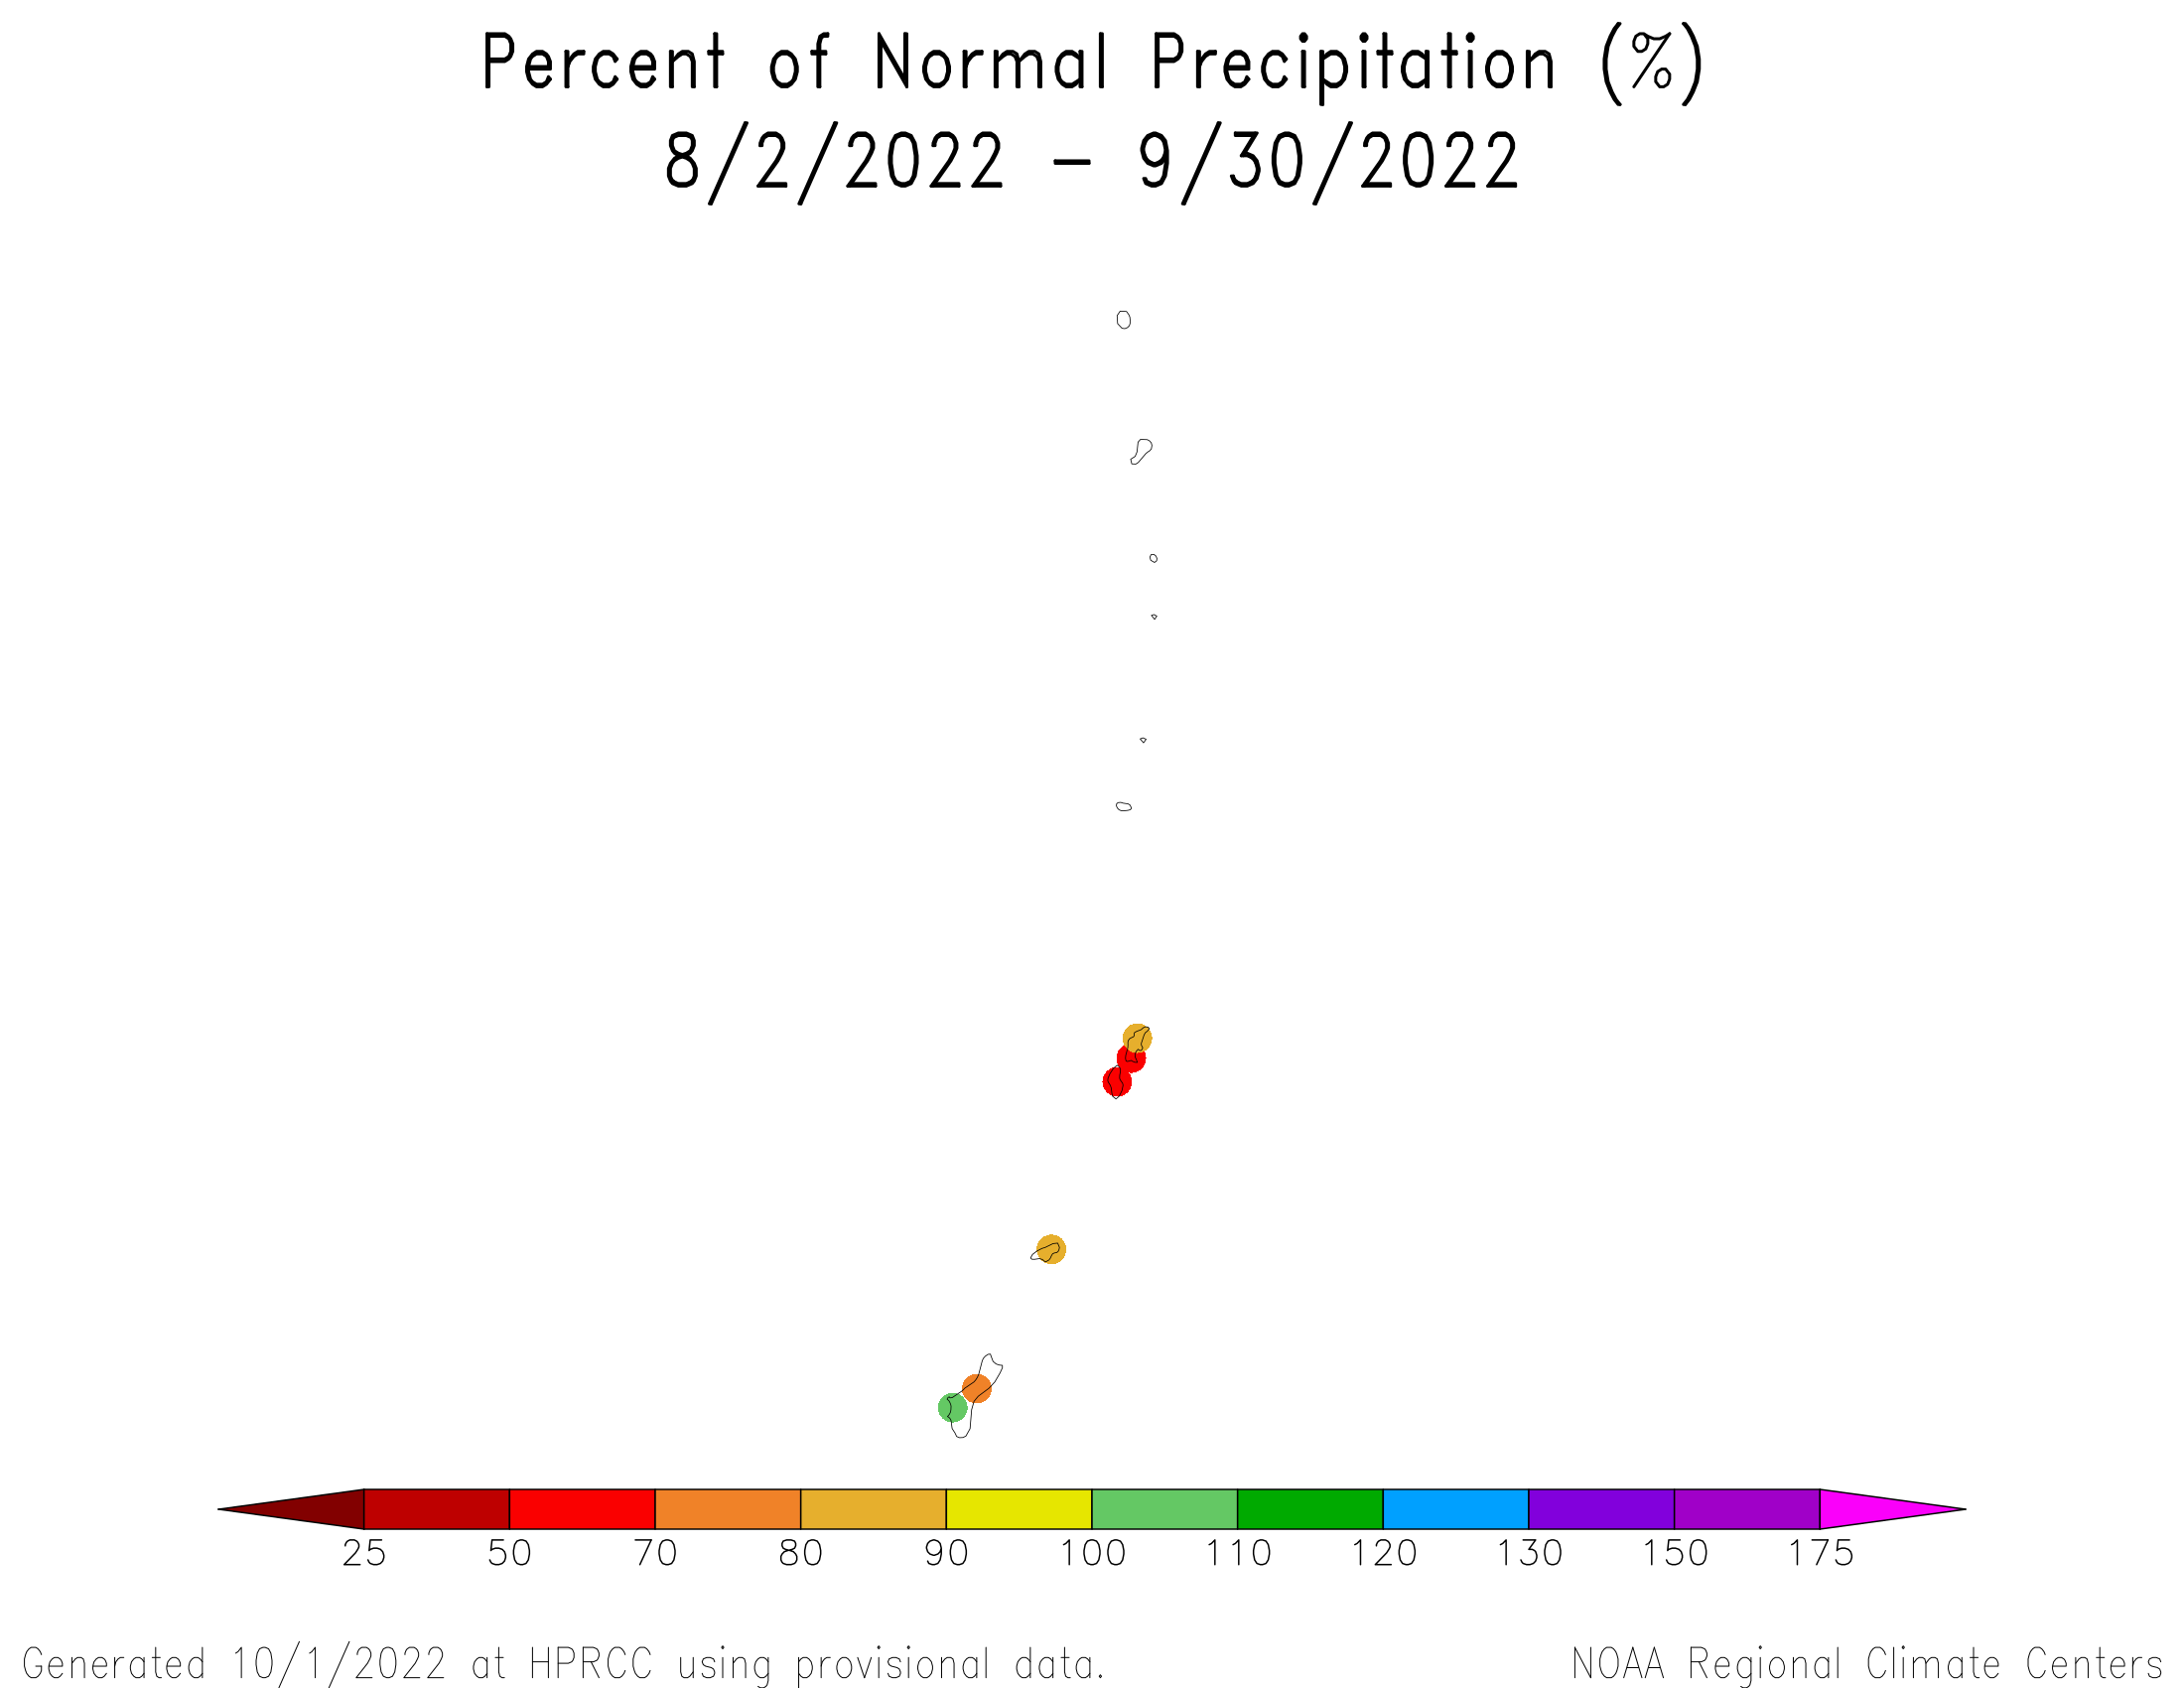 August-September 2022 Percent of Normal Precipitation for the Marianas